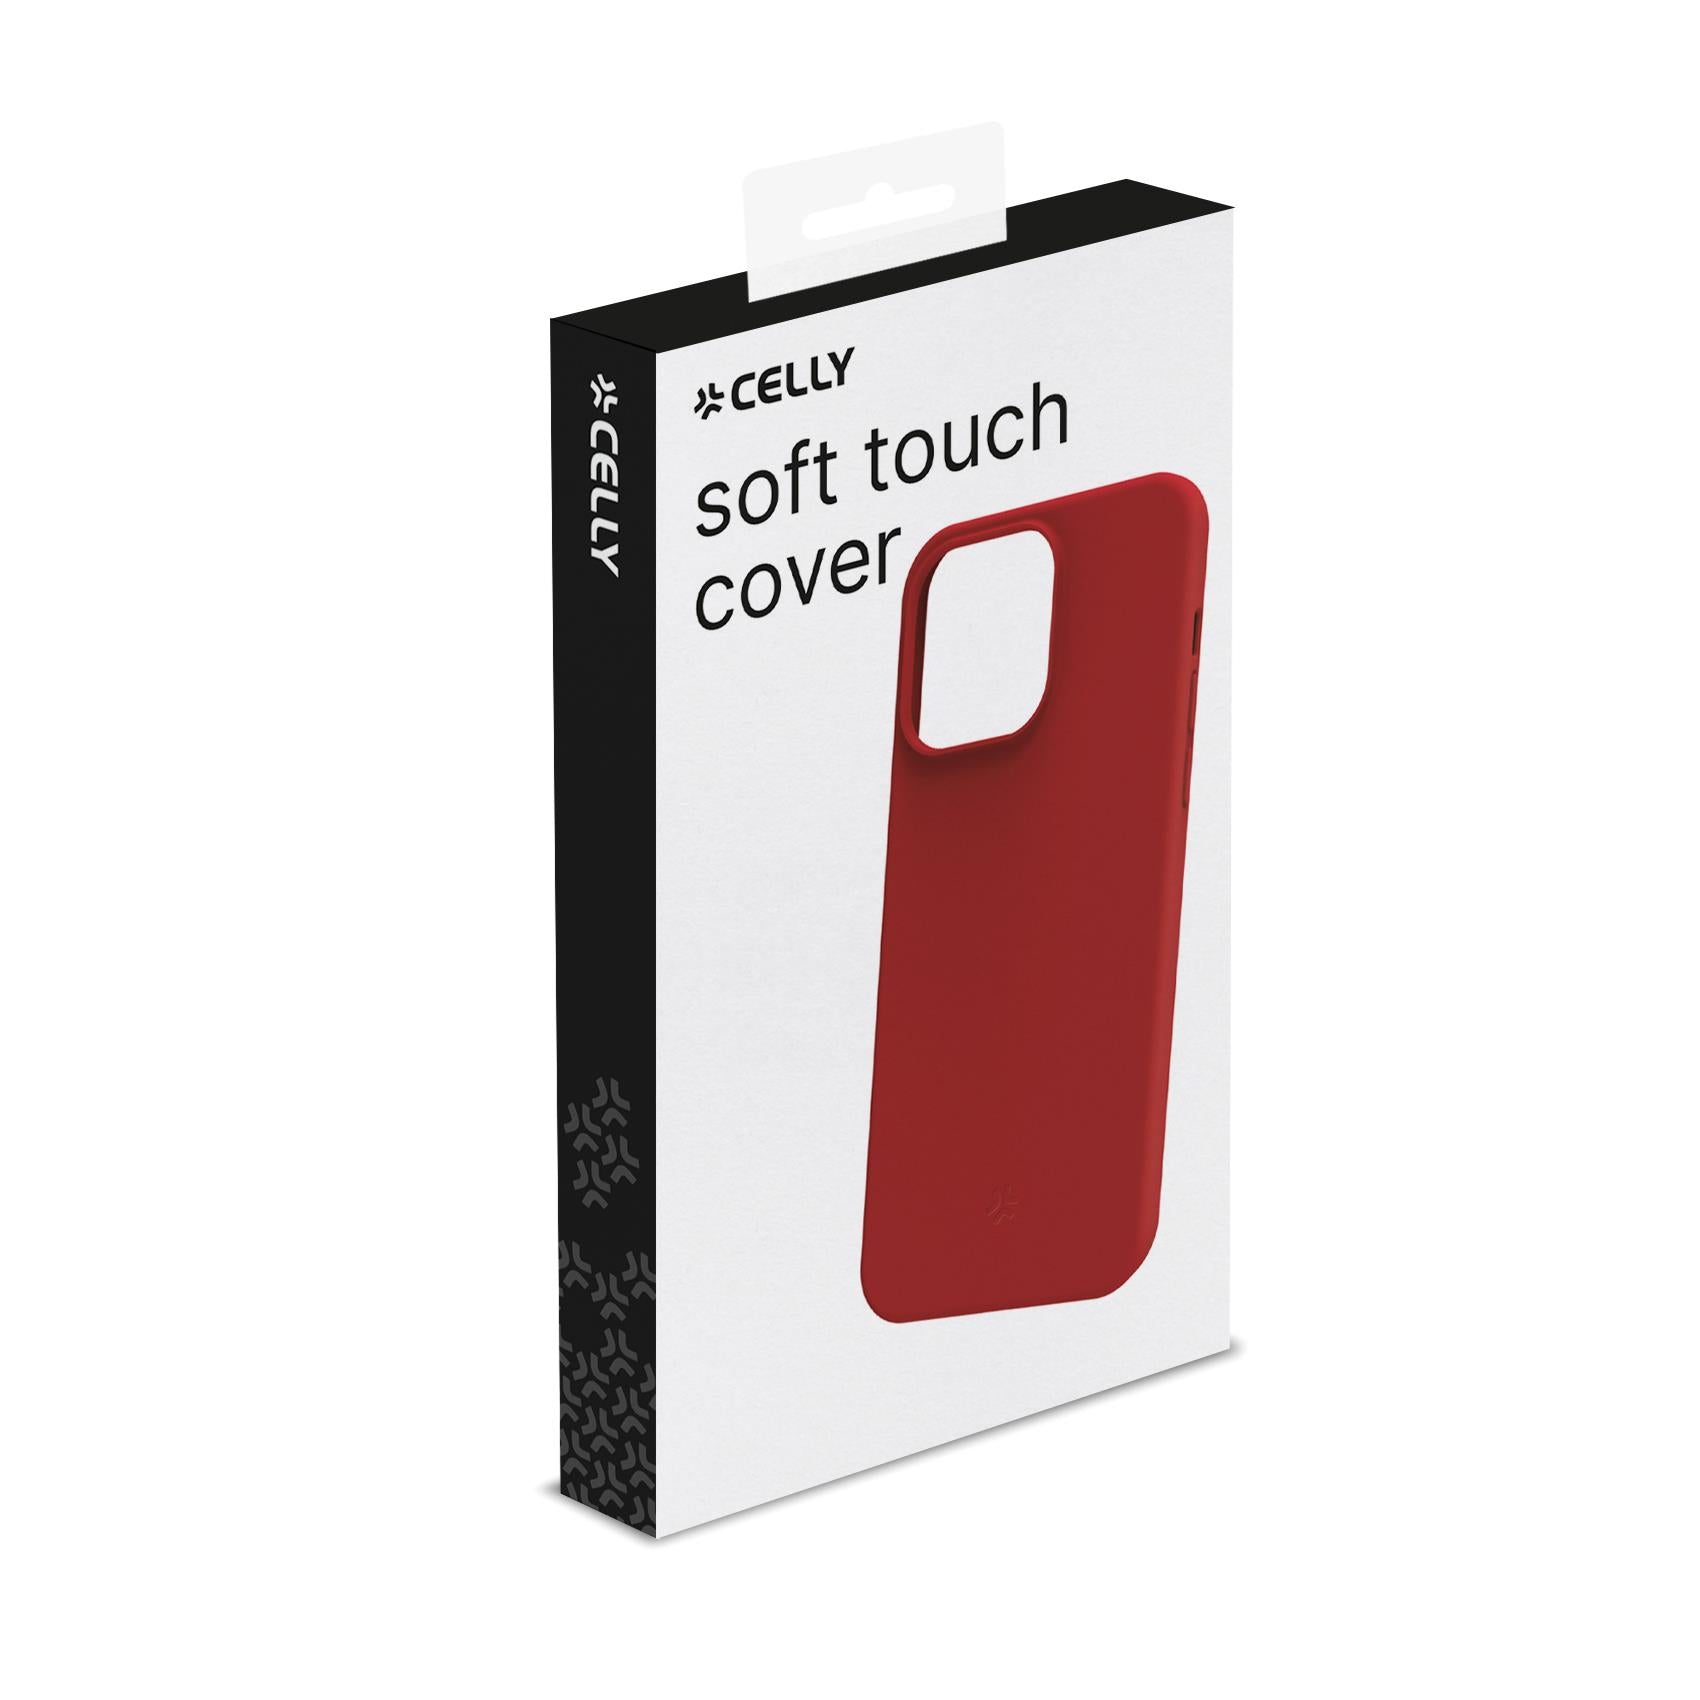 Celly CROMO IPHONE 15 / 14 / 13 Case red